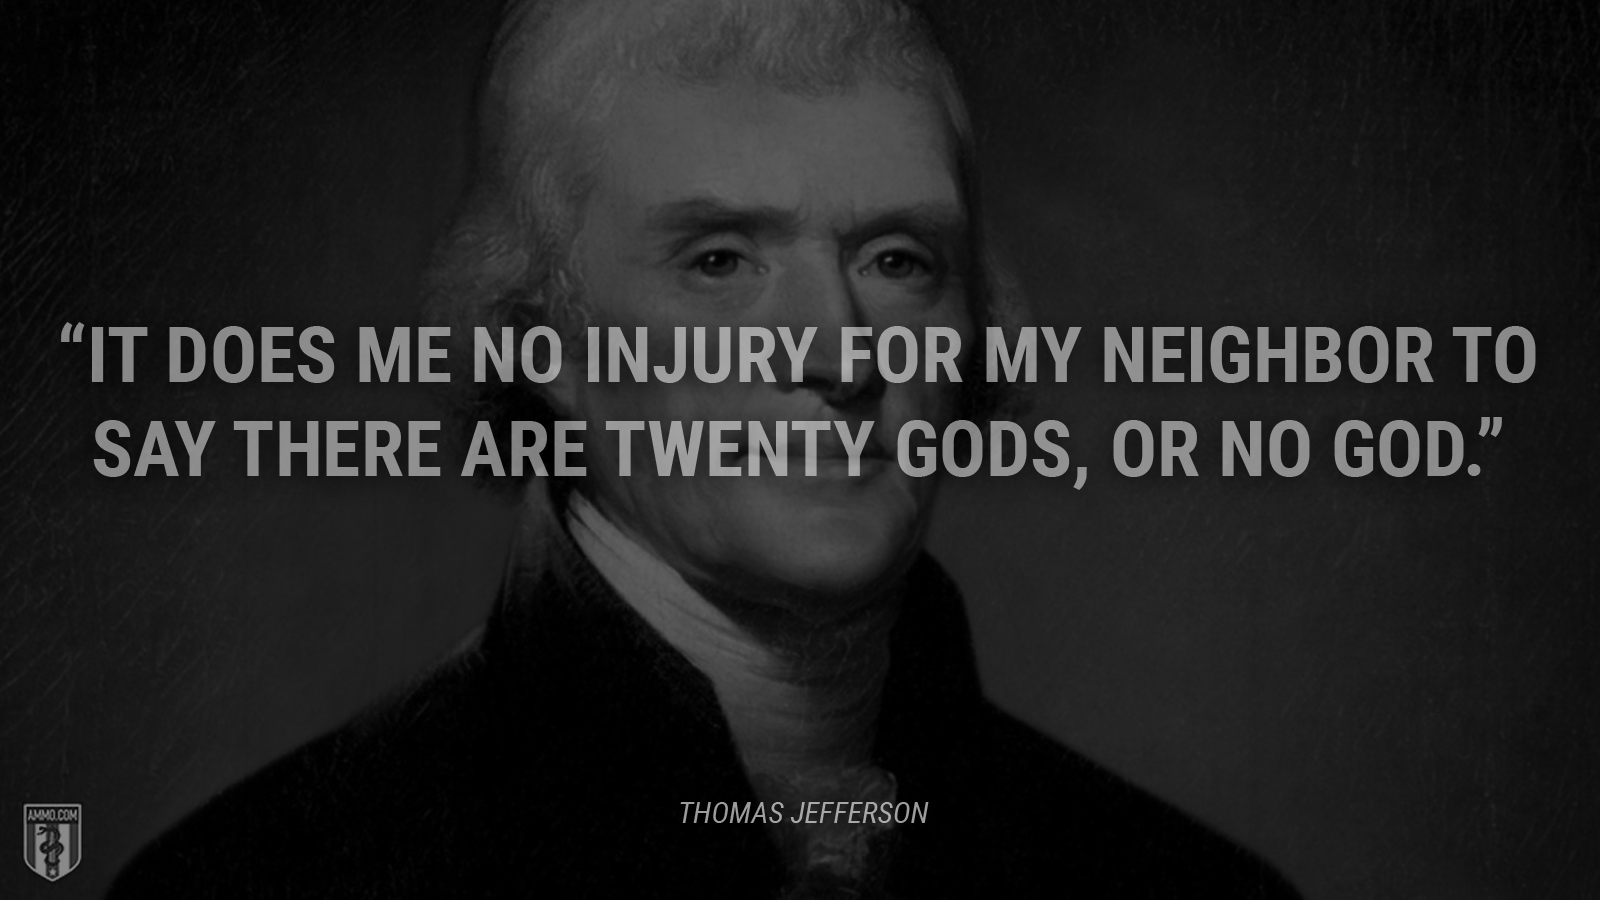 “It does me no injury for my neighbor to say there are twenty gods, or no God.” - Thomas Jefferson